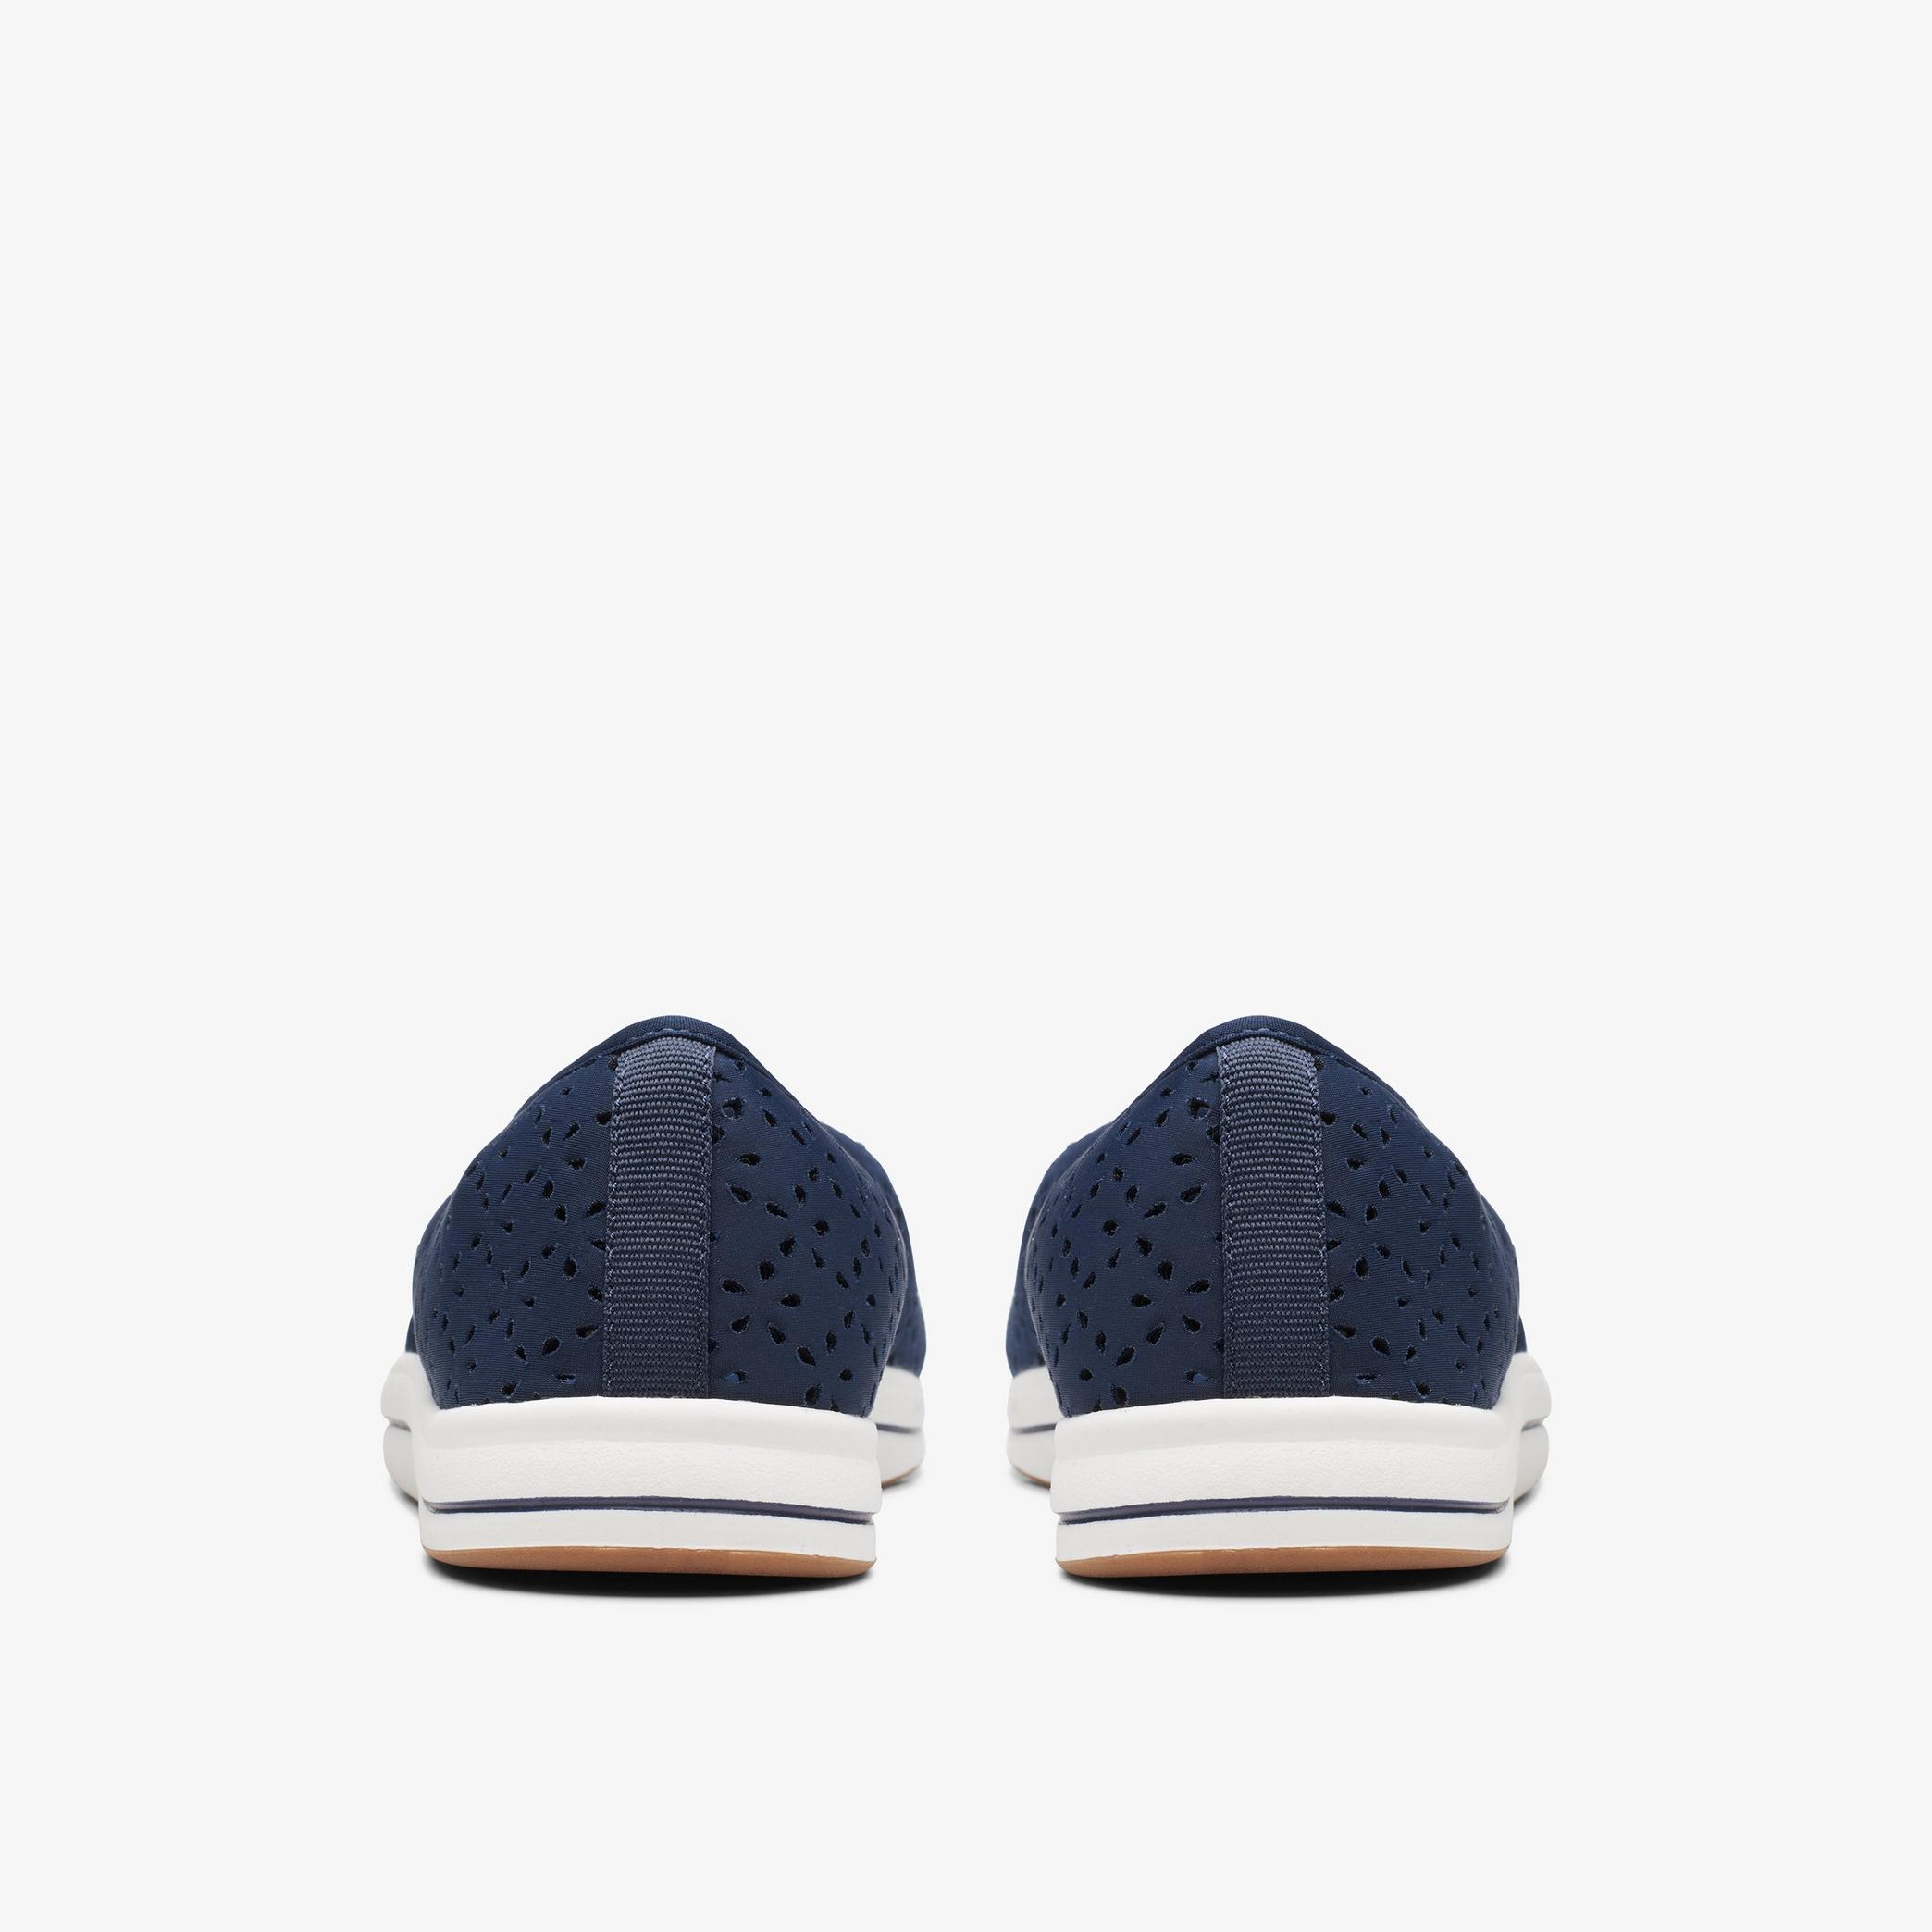 Breeze Emily Navy Slip Ons, view 5 of 6